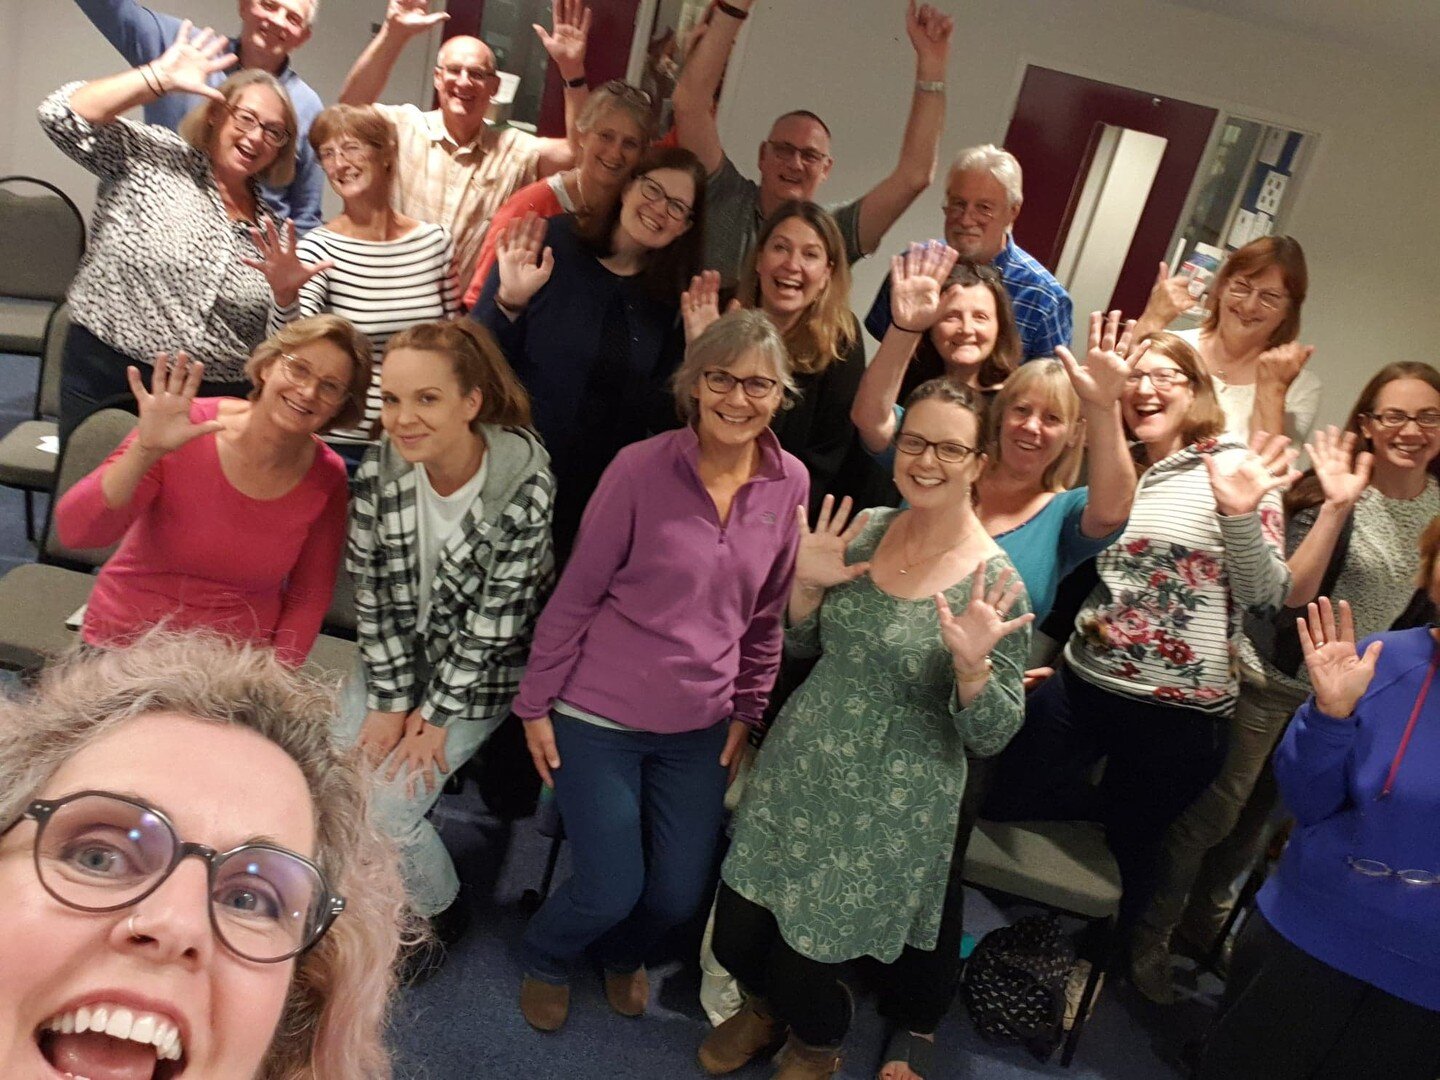 The Singergy Reigate choir having a fabulous time last night learning Africa&hellip;even if there are a lot of words to get your head around!

We love all the happy faces. Singing with Singergy is a blast! 

http://singergy.co.uk/contemporary-gospel-